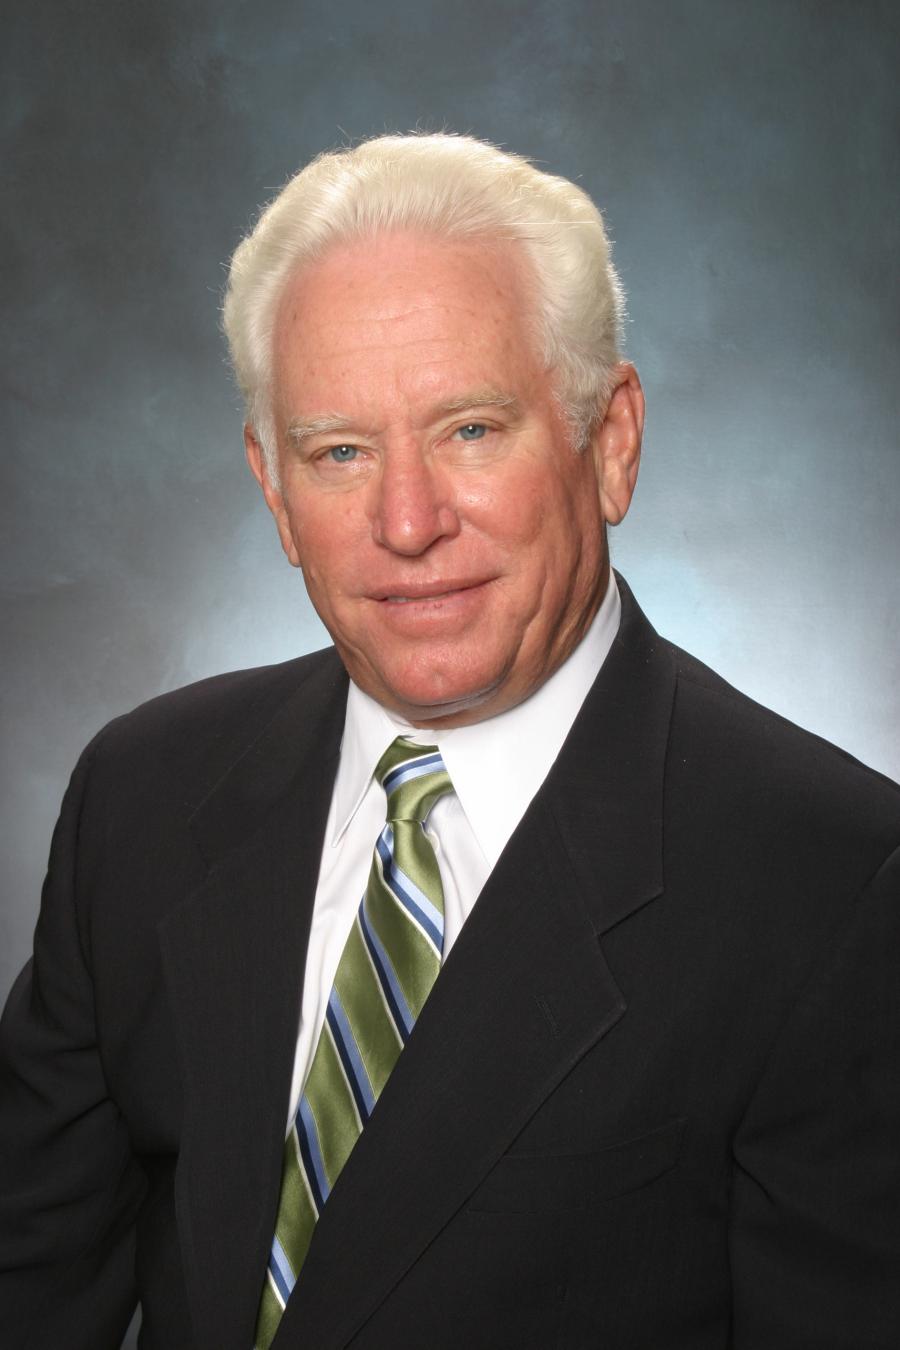 A well-known businessman and community leader in central Florida, Mr. Ringhaver was chairman and president of Ringhaver Equipment Company when he retired at year end 2003.